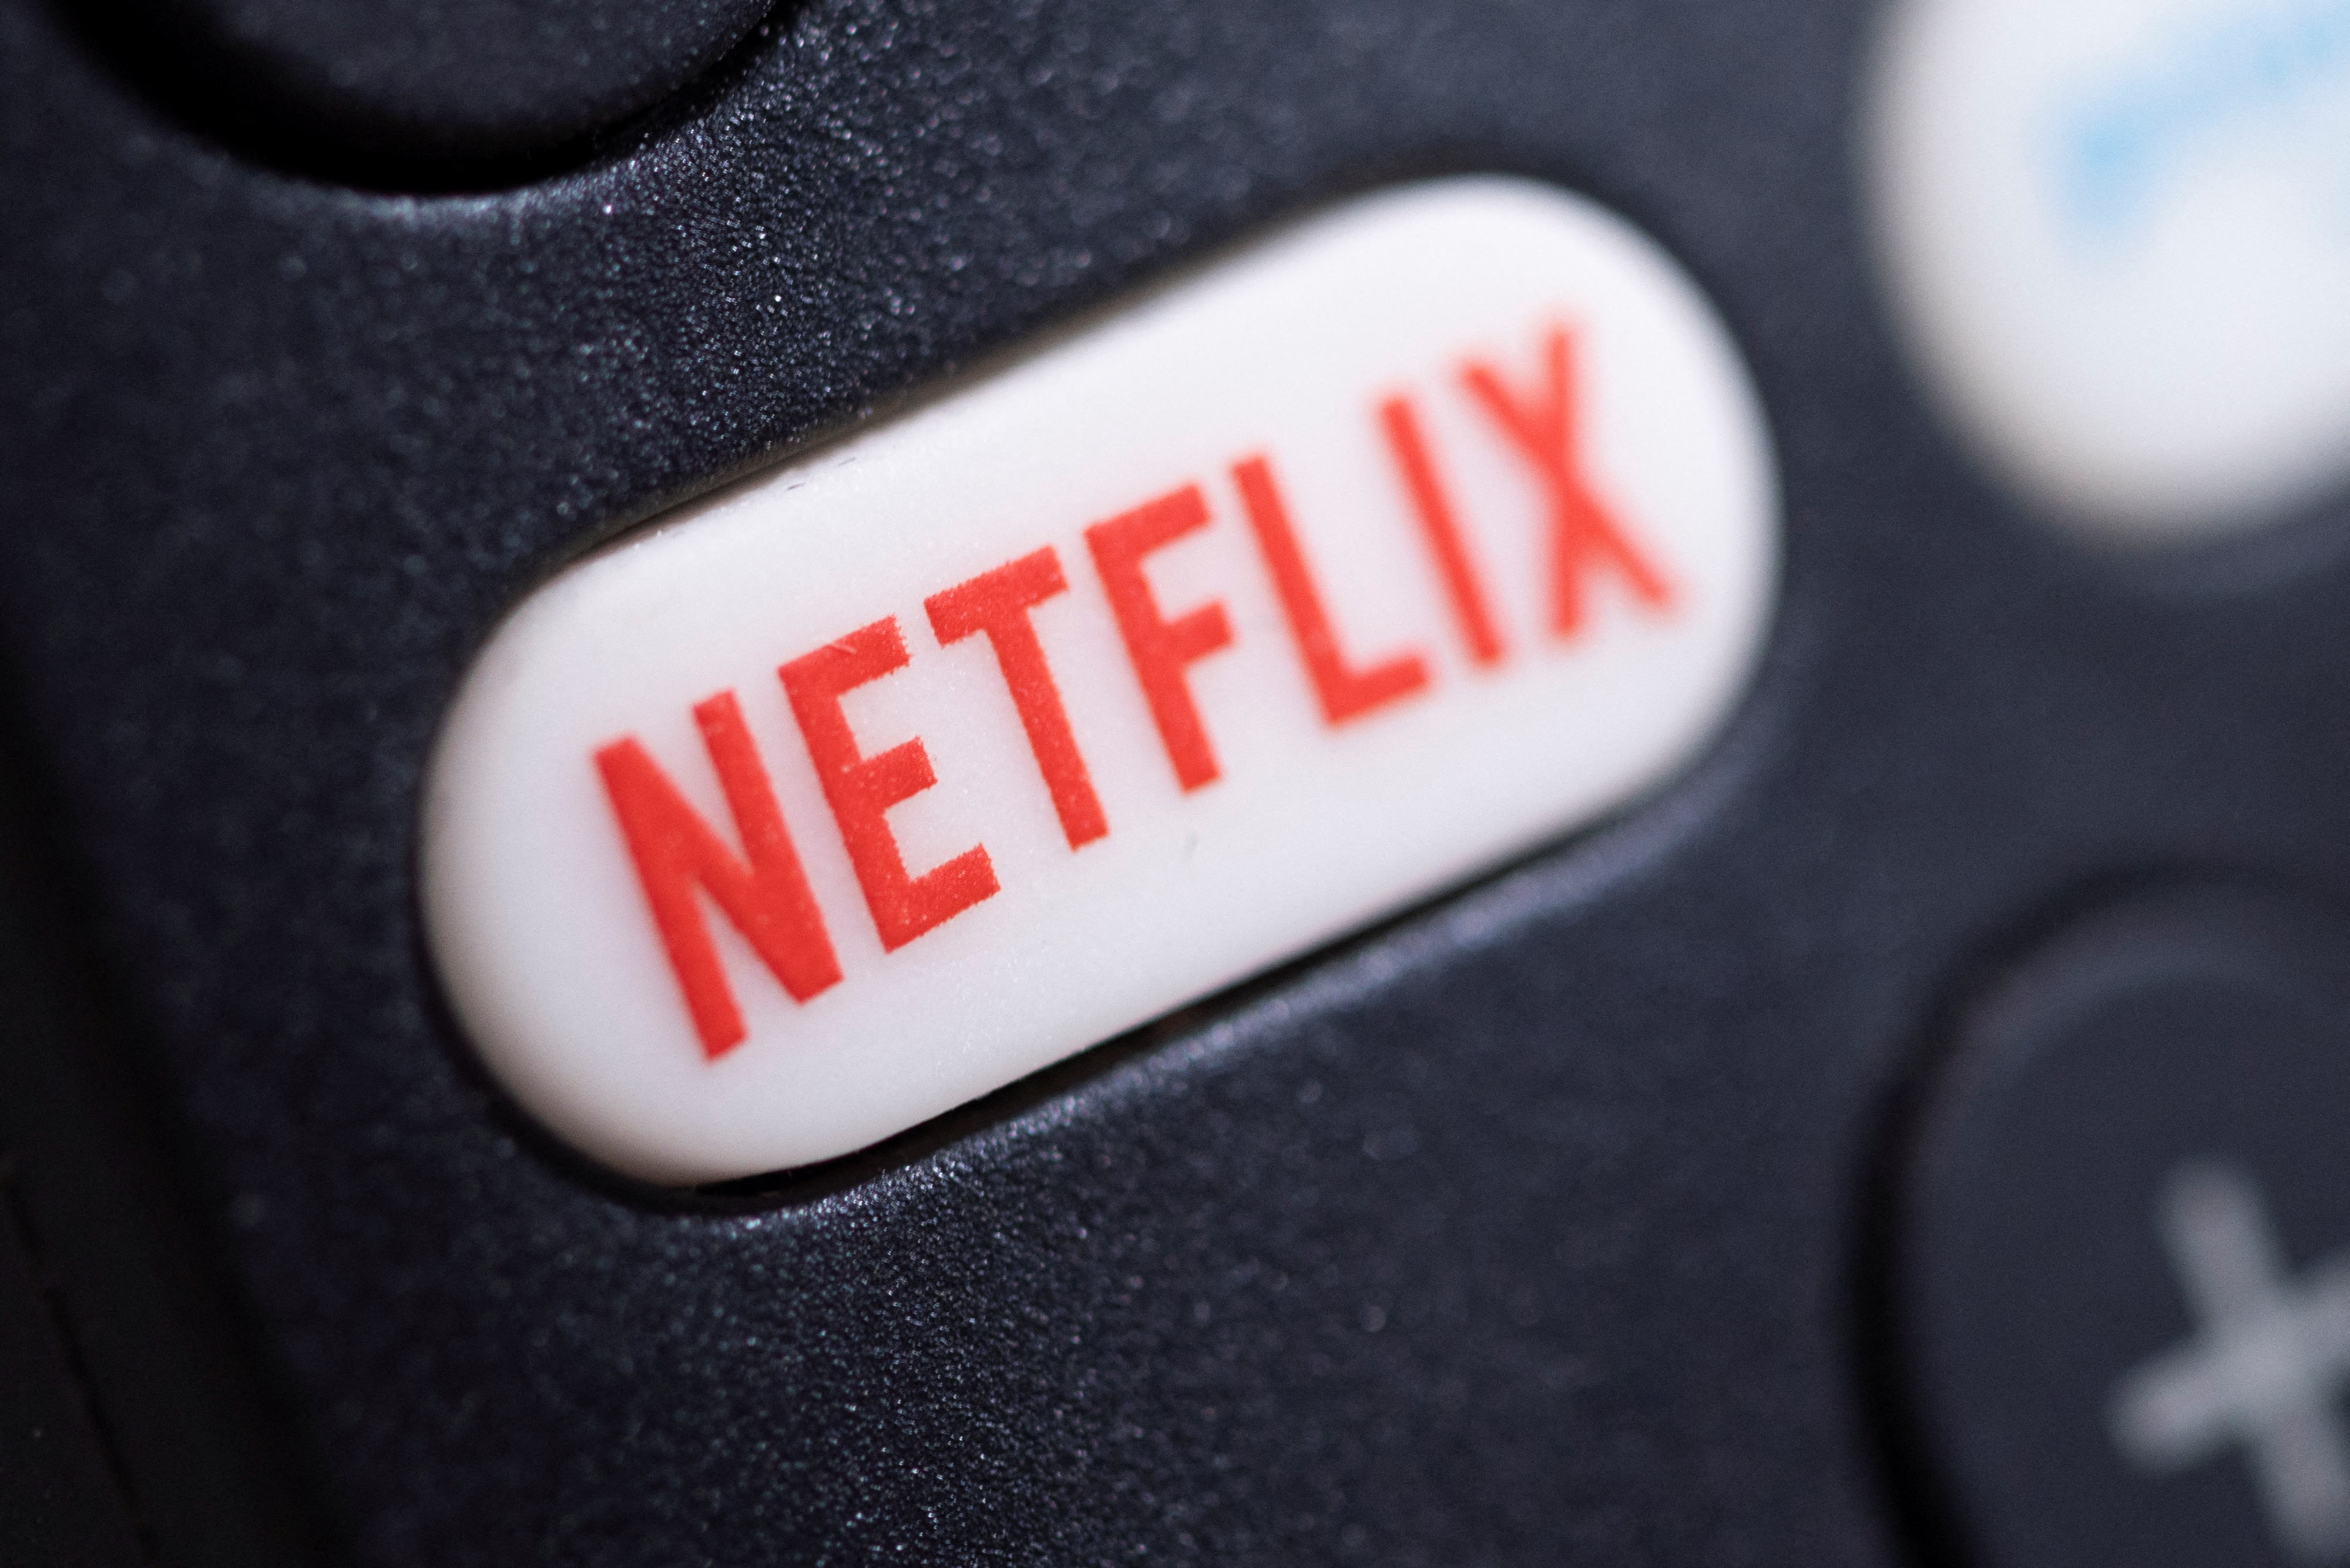 The Netflix logo is seen on a TV remote controller, in this illustration